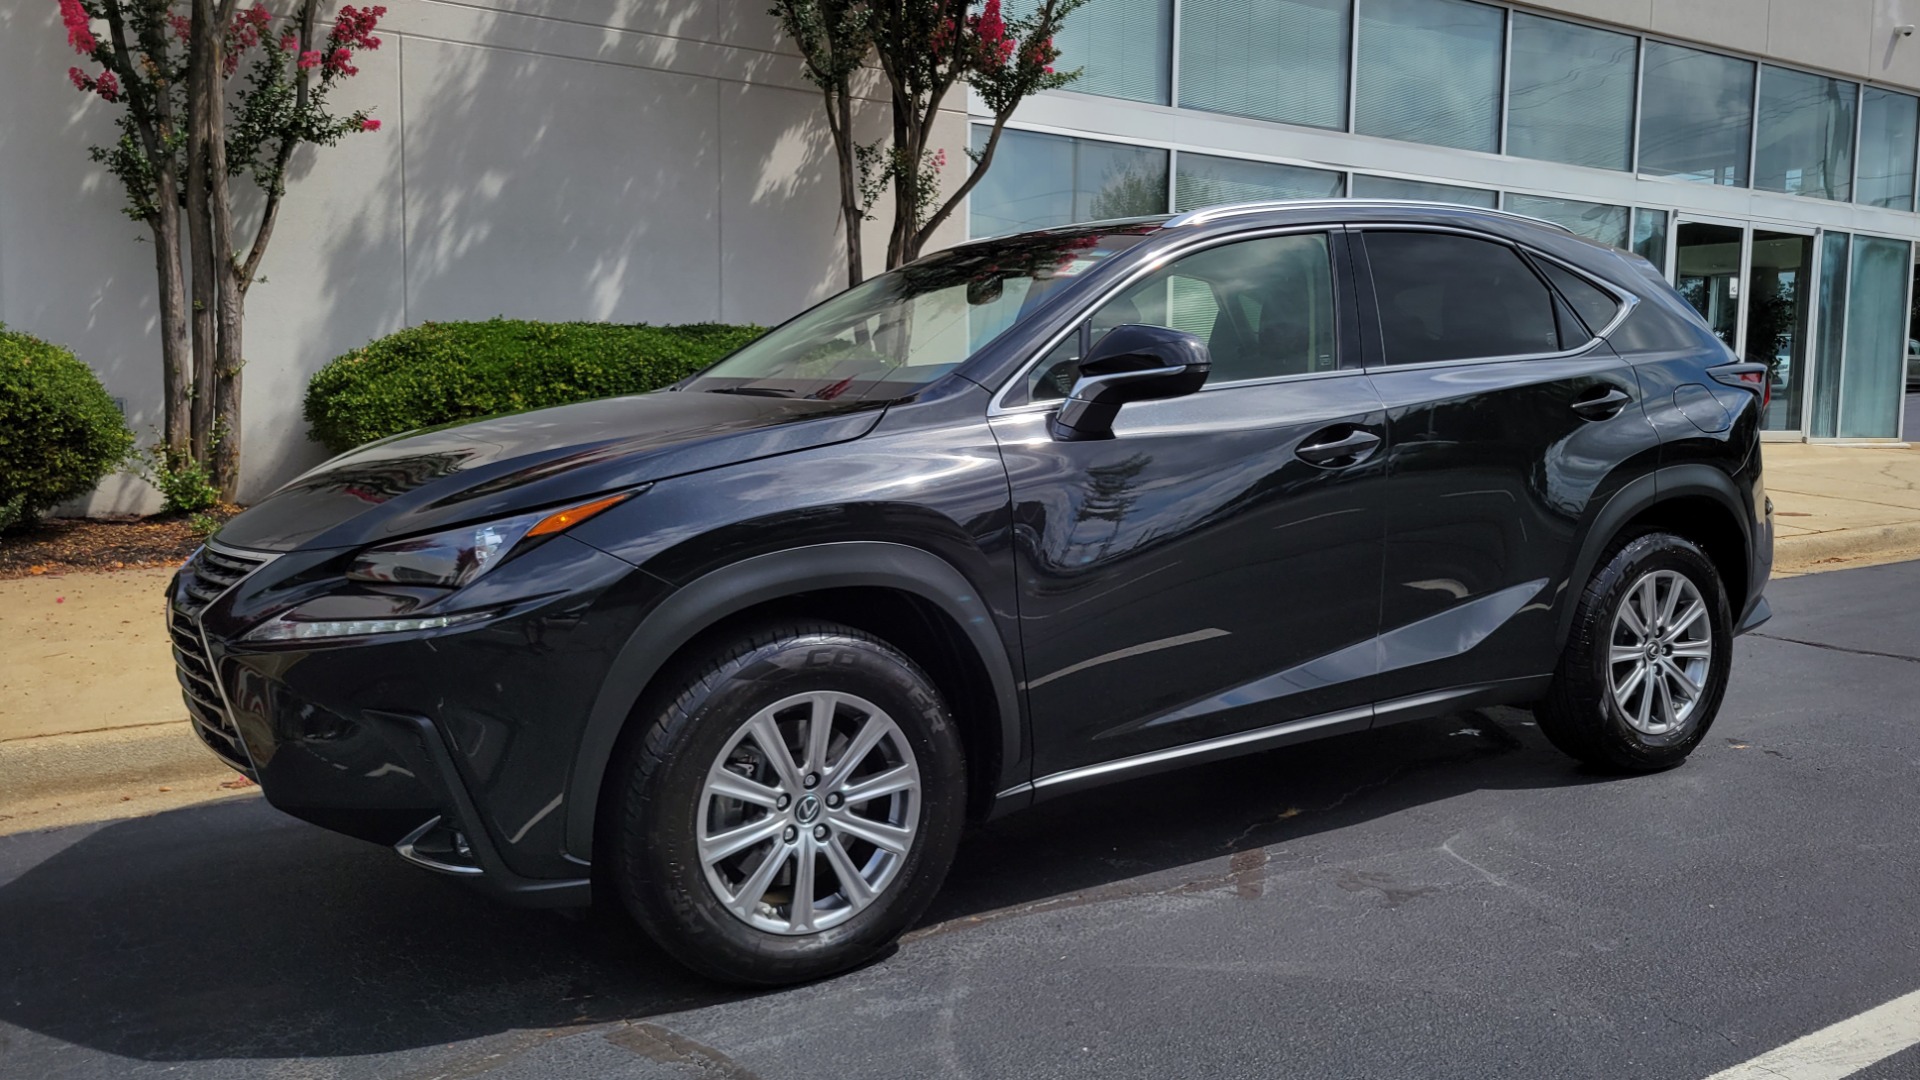 Used 2019 Lexus NX 300 / 2.0L TURBO / AUTO / SUNROOF / VENTILATED SEATS / CAMERA for sale Sold at Formula Imports in Charlotte NC 28227 1